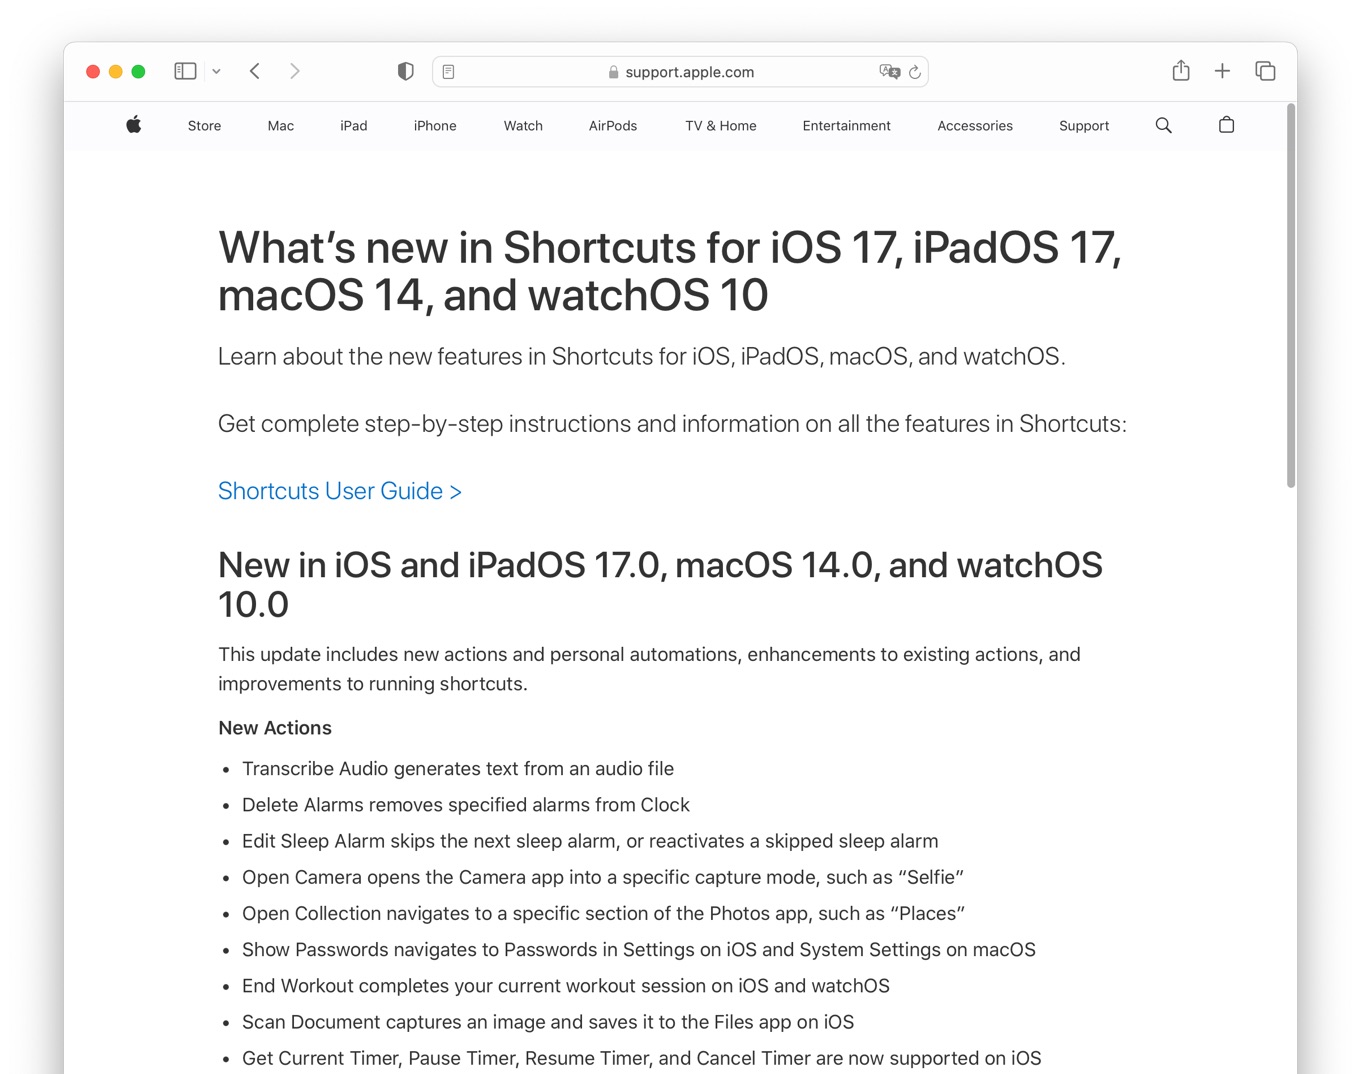 What’s new in Shortcuts for iOS 17, iPadOS 17, macOS 14, and watchOS 10